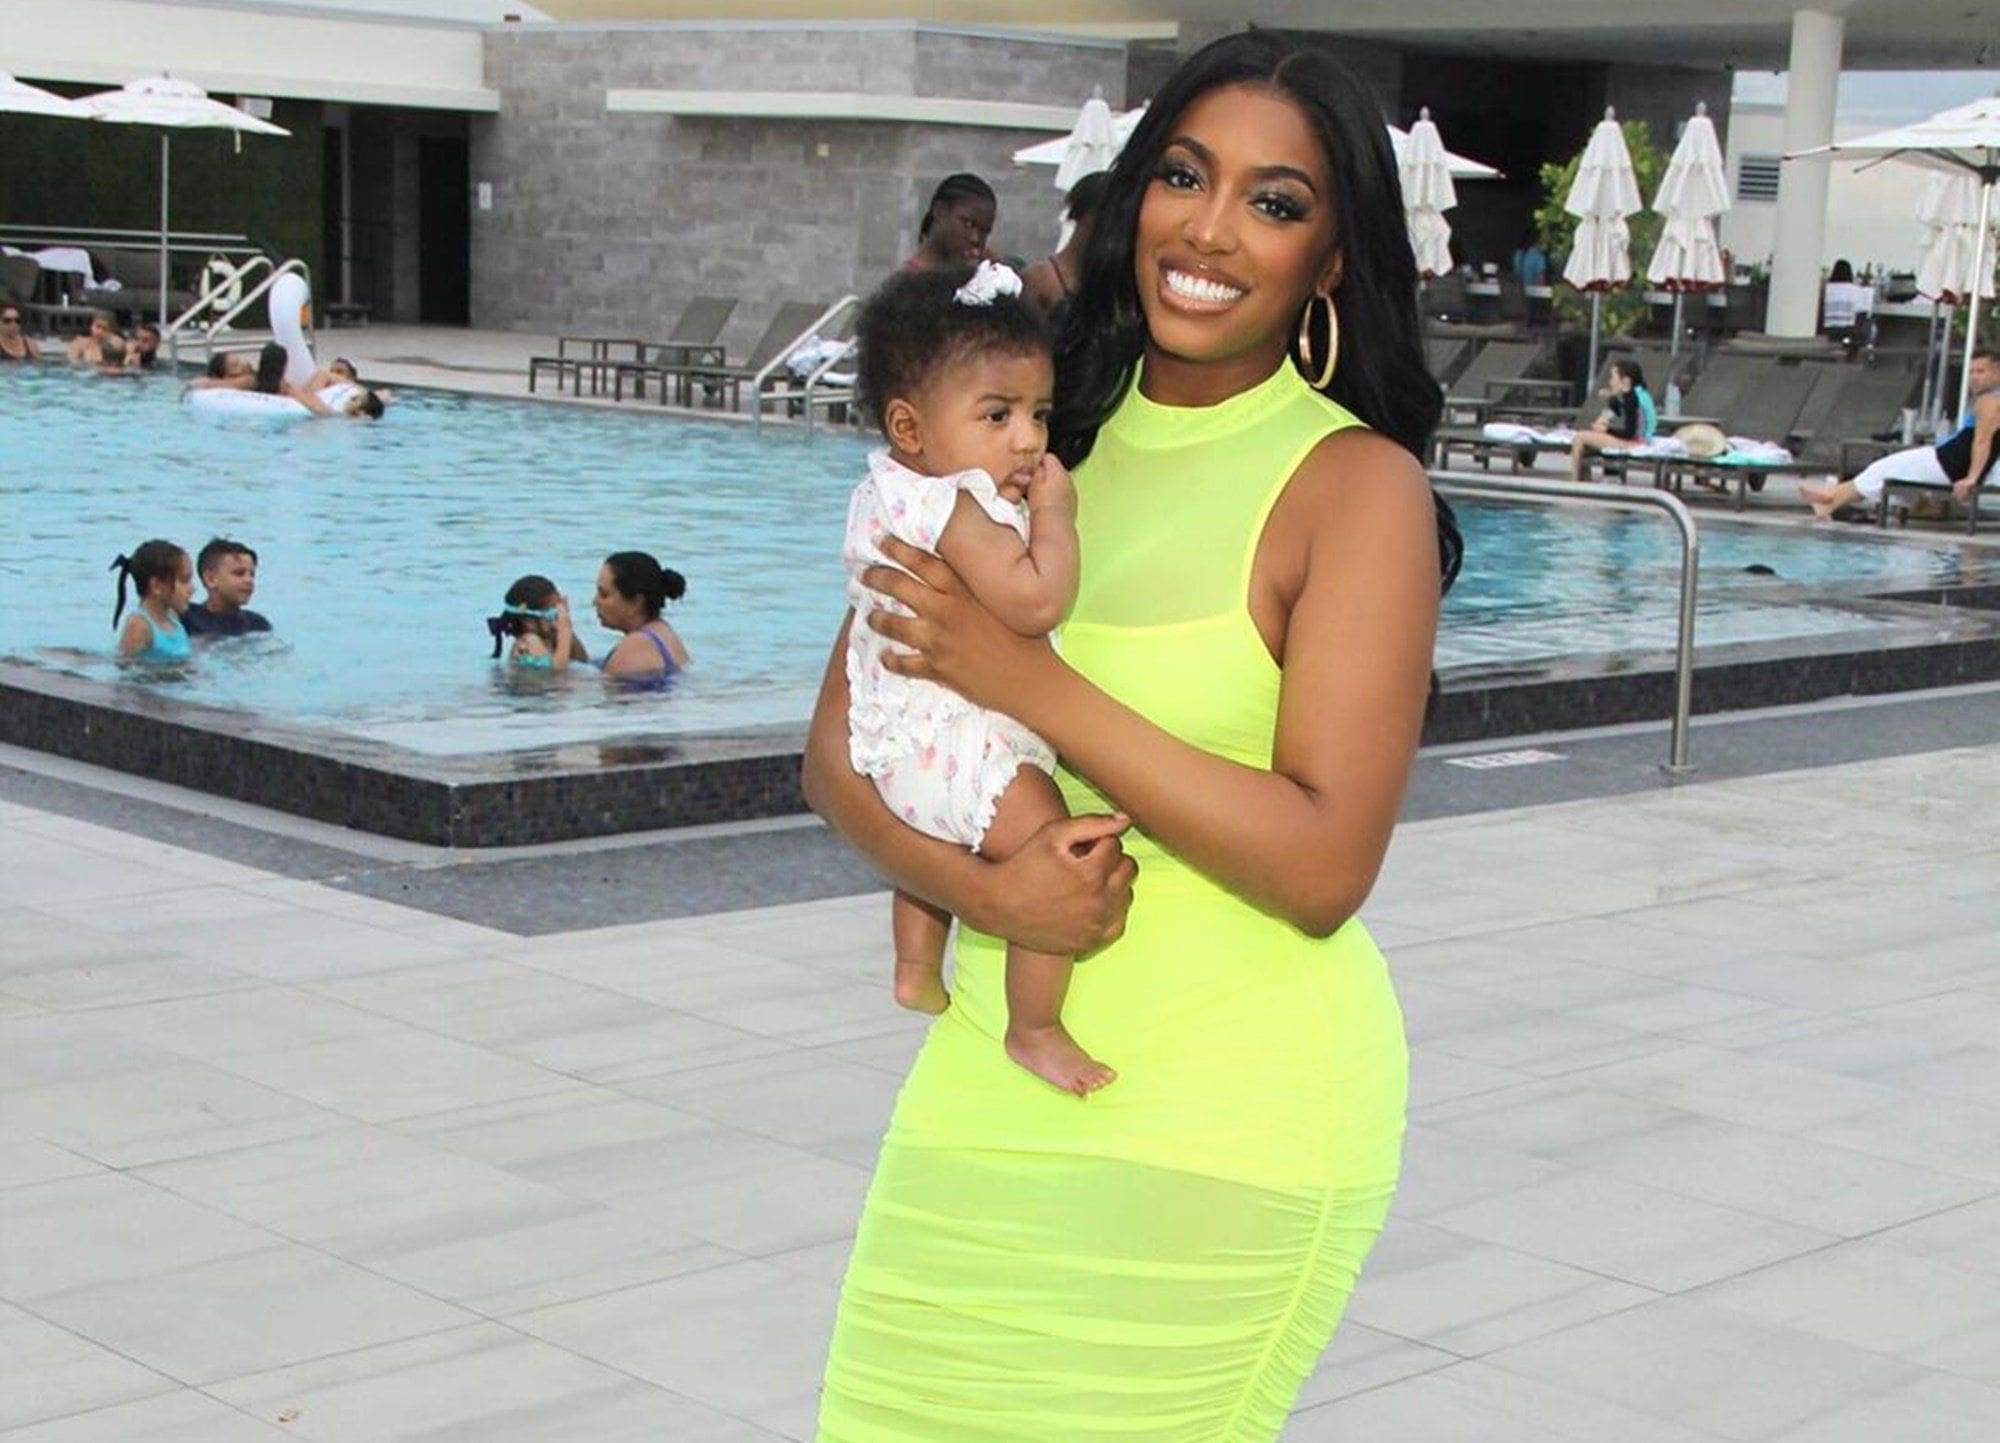 Porsha Williams Has A Photo Session With Pilar Jhena And Fans Praise Dennis McKinley's Daughter